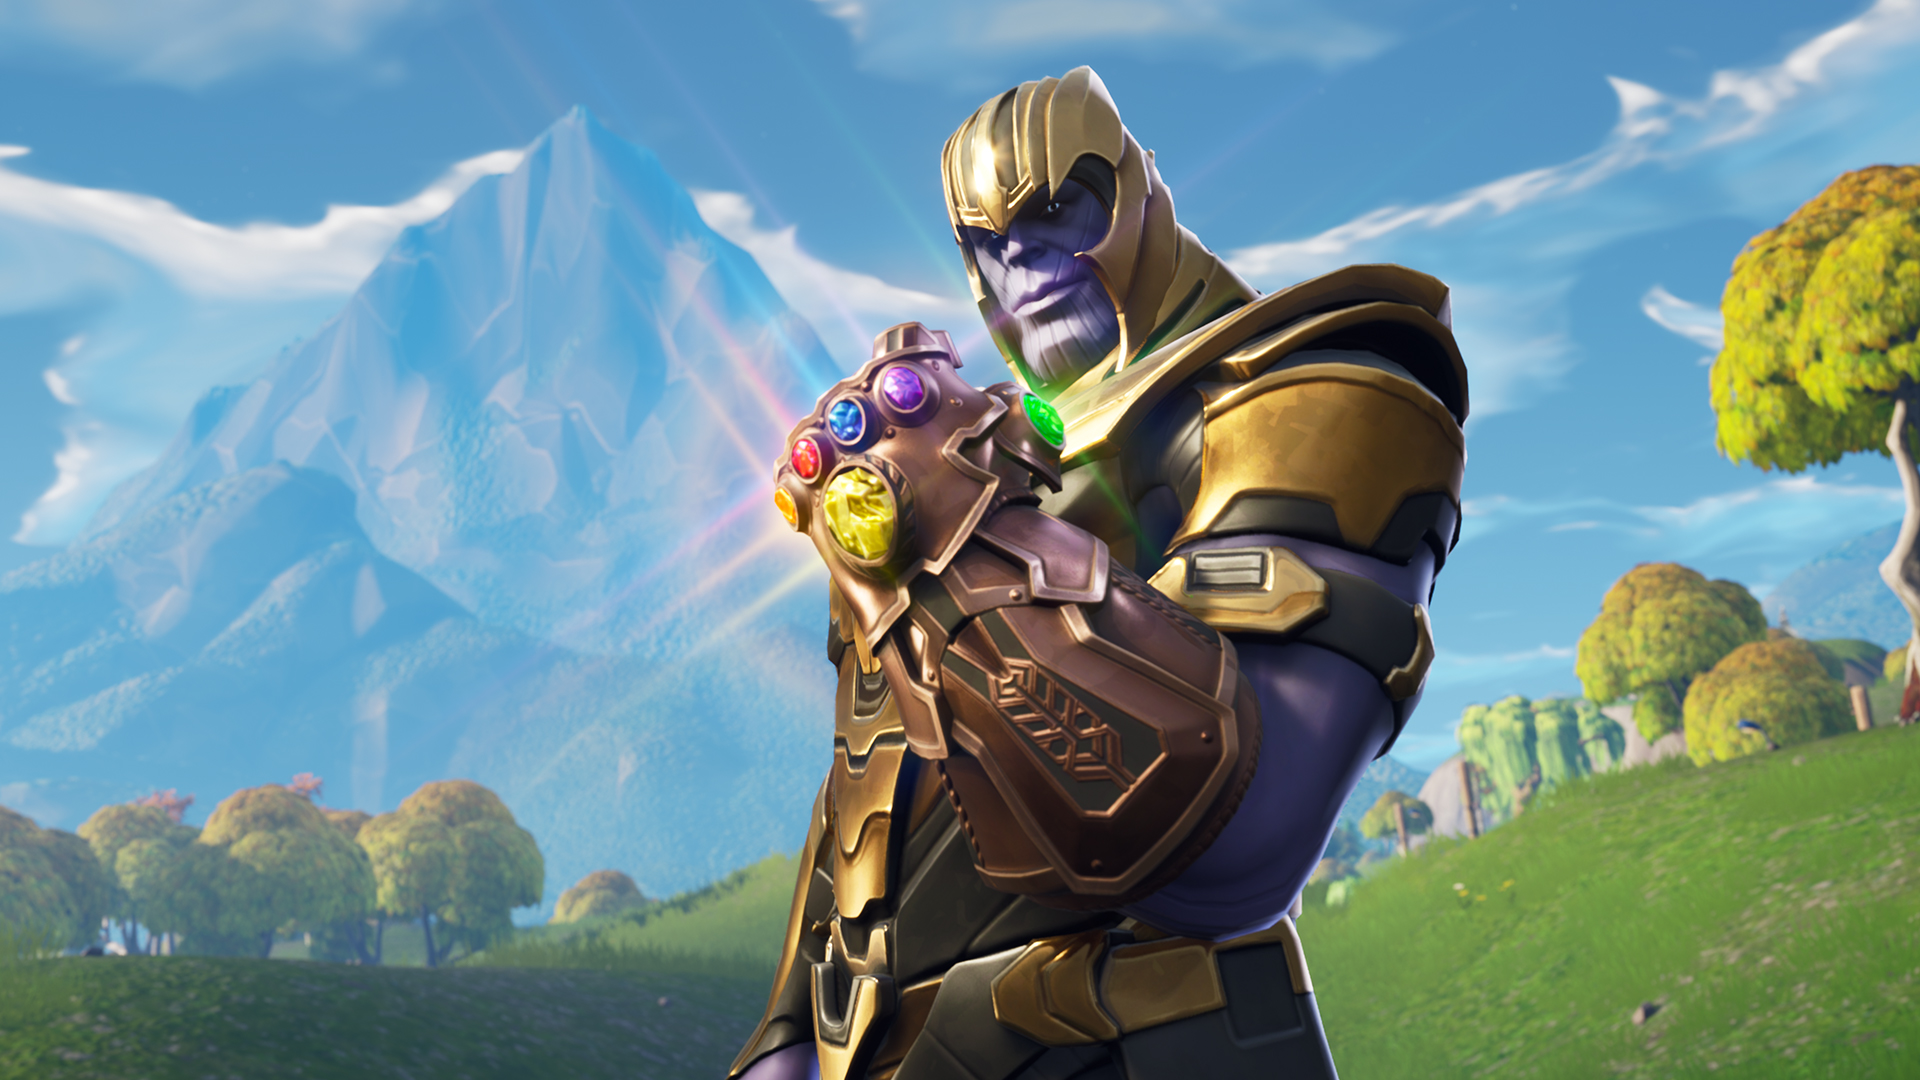 Fortnite V4.1 Update Lets you PLAY AS THANOS! - Patch ...